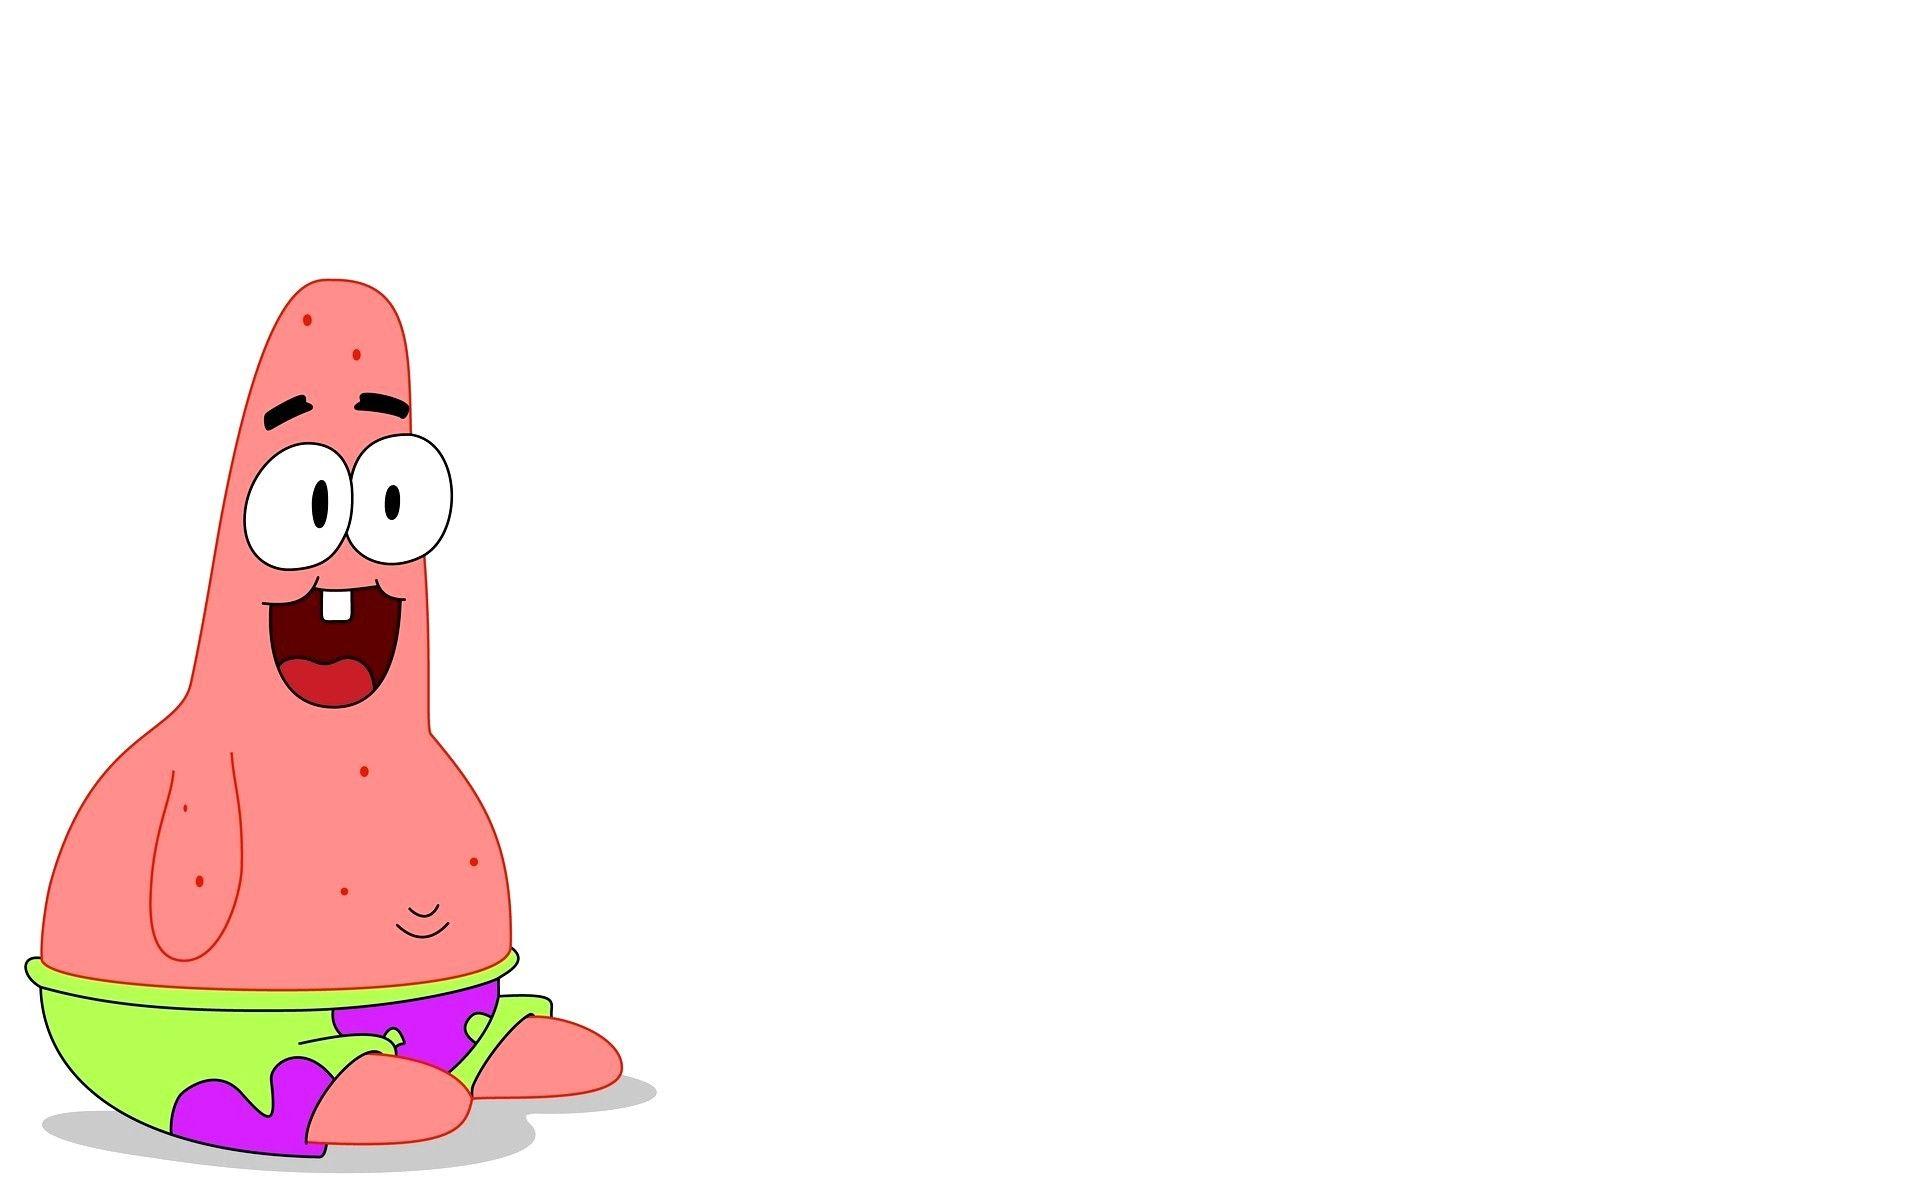 Patrick Star Cool Wallpapers Image, Wallpapers, HD Wallpapers